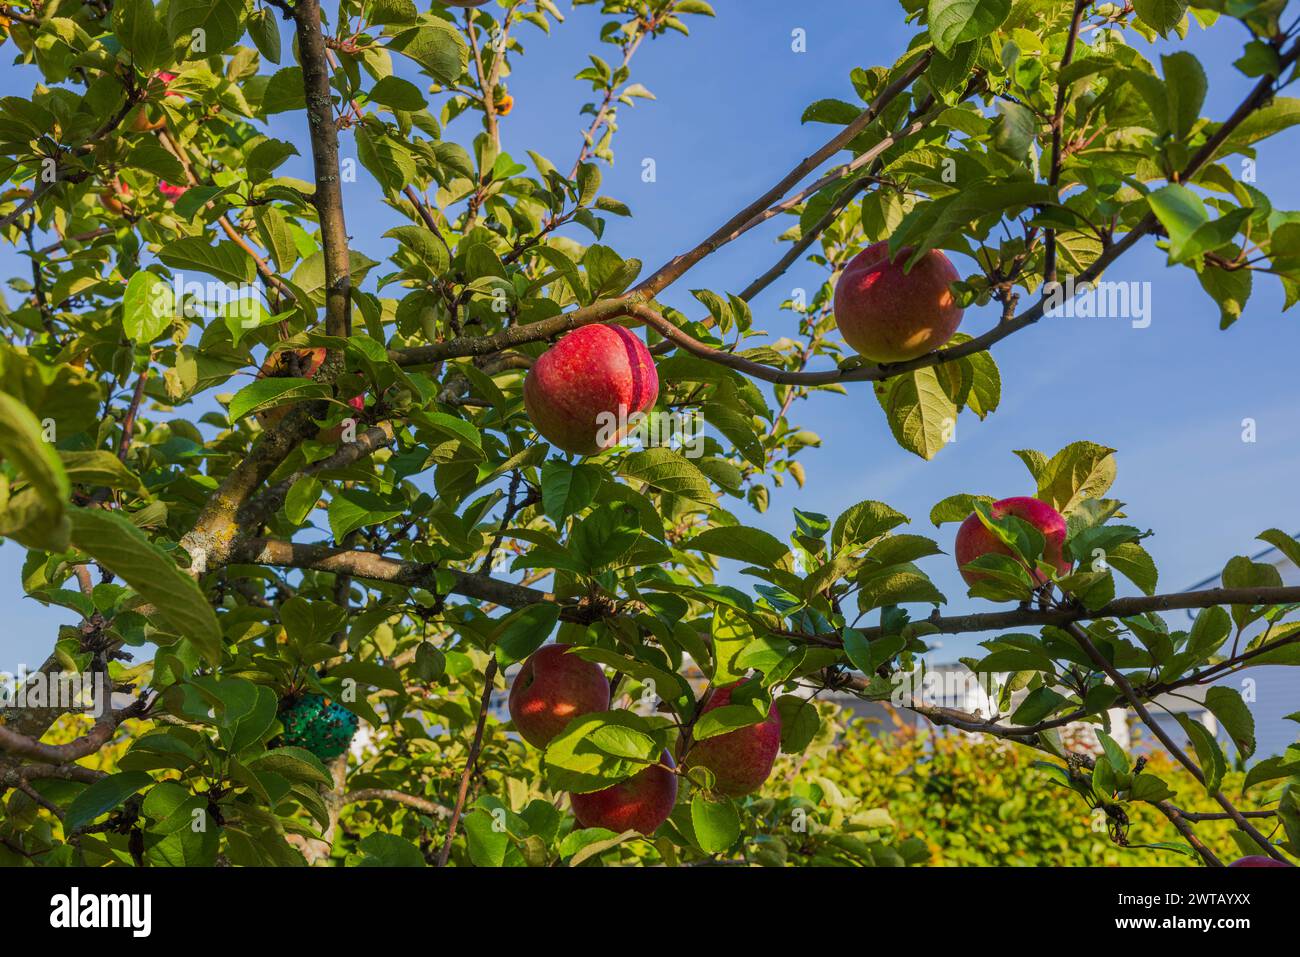 Beautiful view of a garden with apples growing on a tree on a clear sunny day. Stock Photo